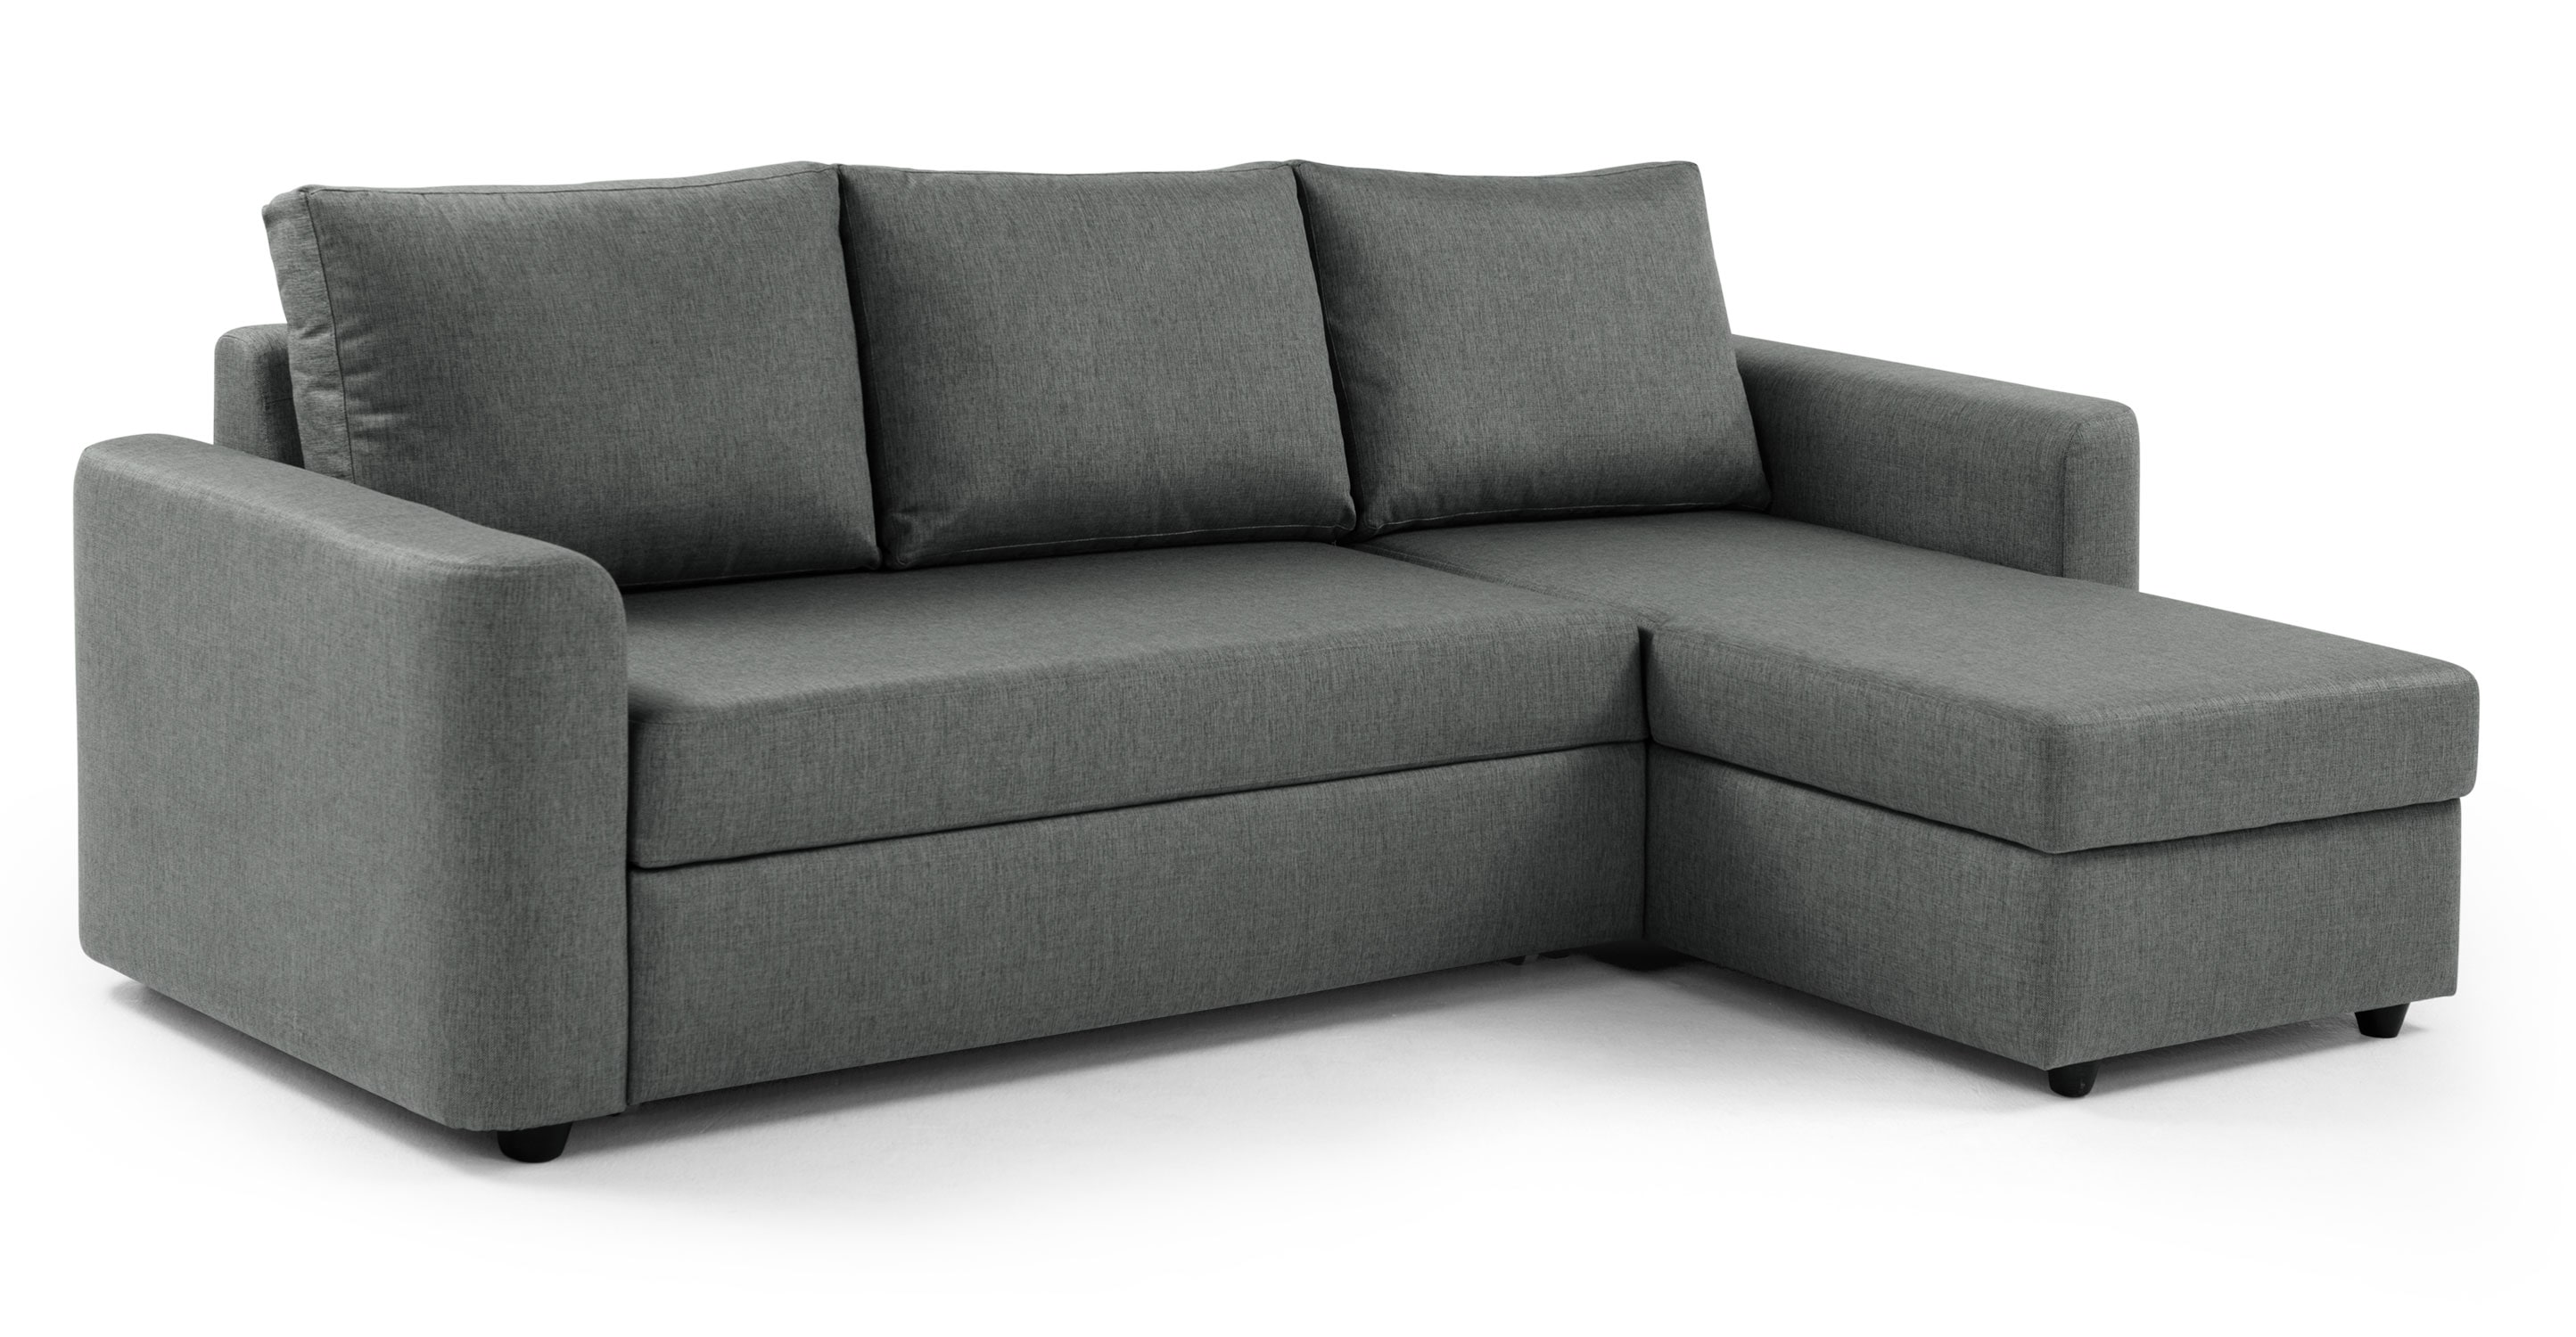 Corner Sofa Beds To Maximise Your Small, Small Corner Sofa Bed With Storage